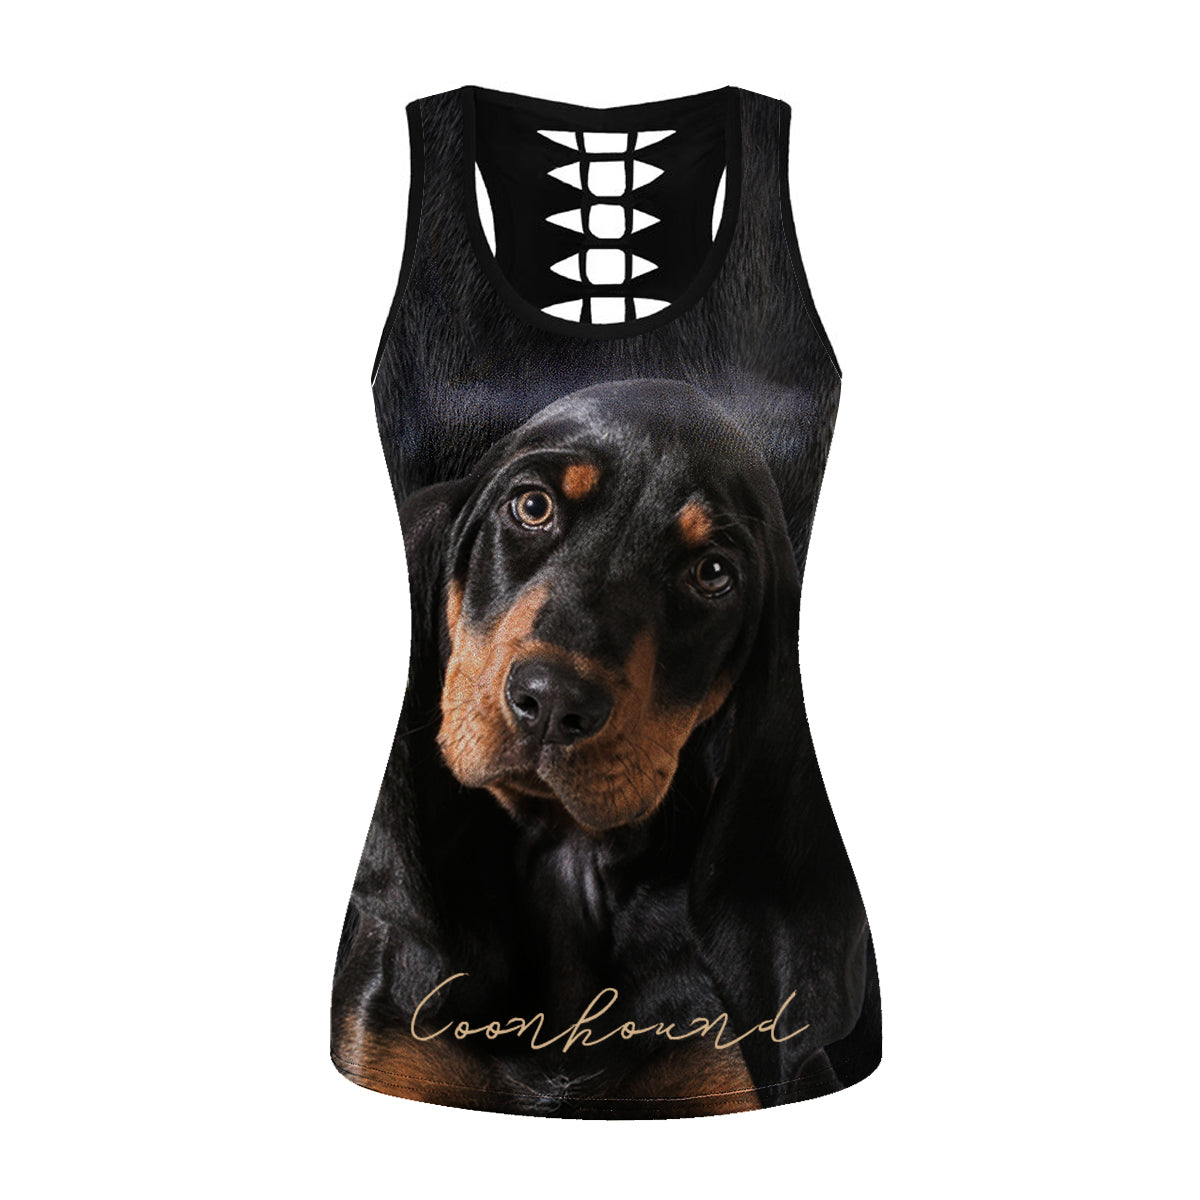 Coonhound - Hollow Tank Top V1